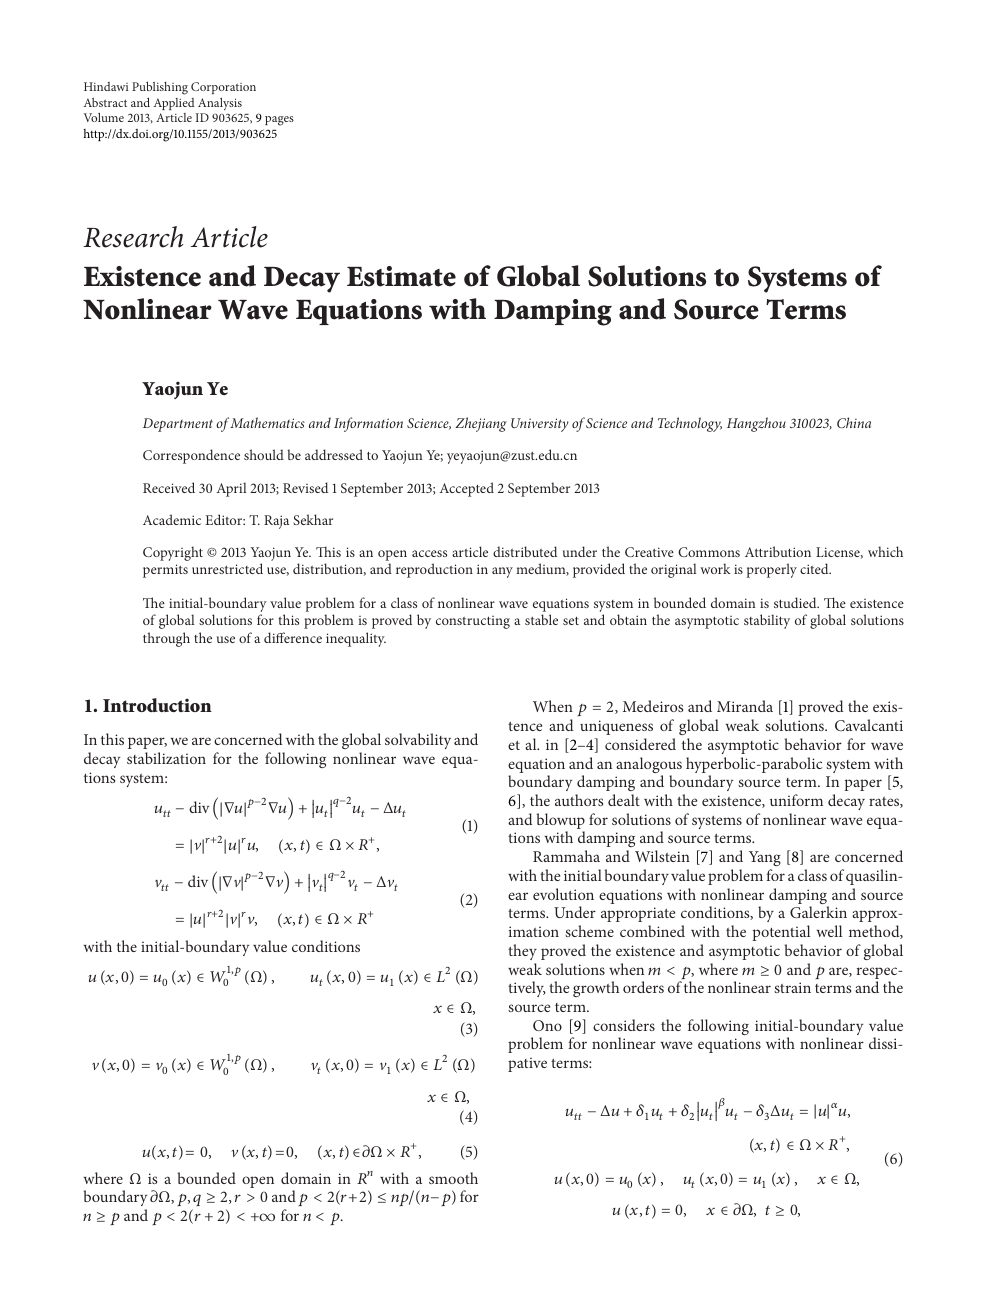 Existence And Decay Estimate Of Global Solutions To Systems Of Nonlinear Wave Equations With Damping And Source Terms Topic Of Research Paper In Mathematics Download Scholarly Article Pdf And Read For